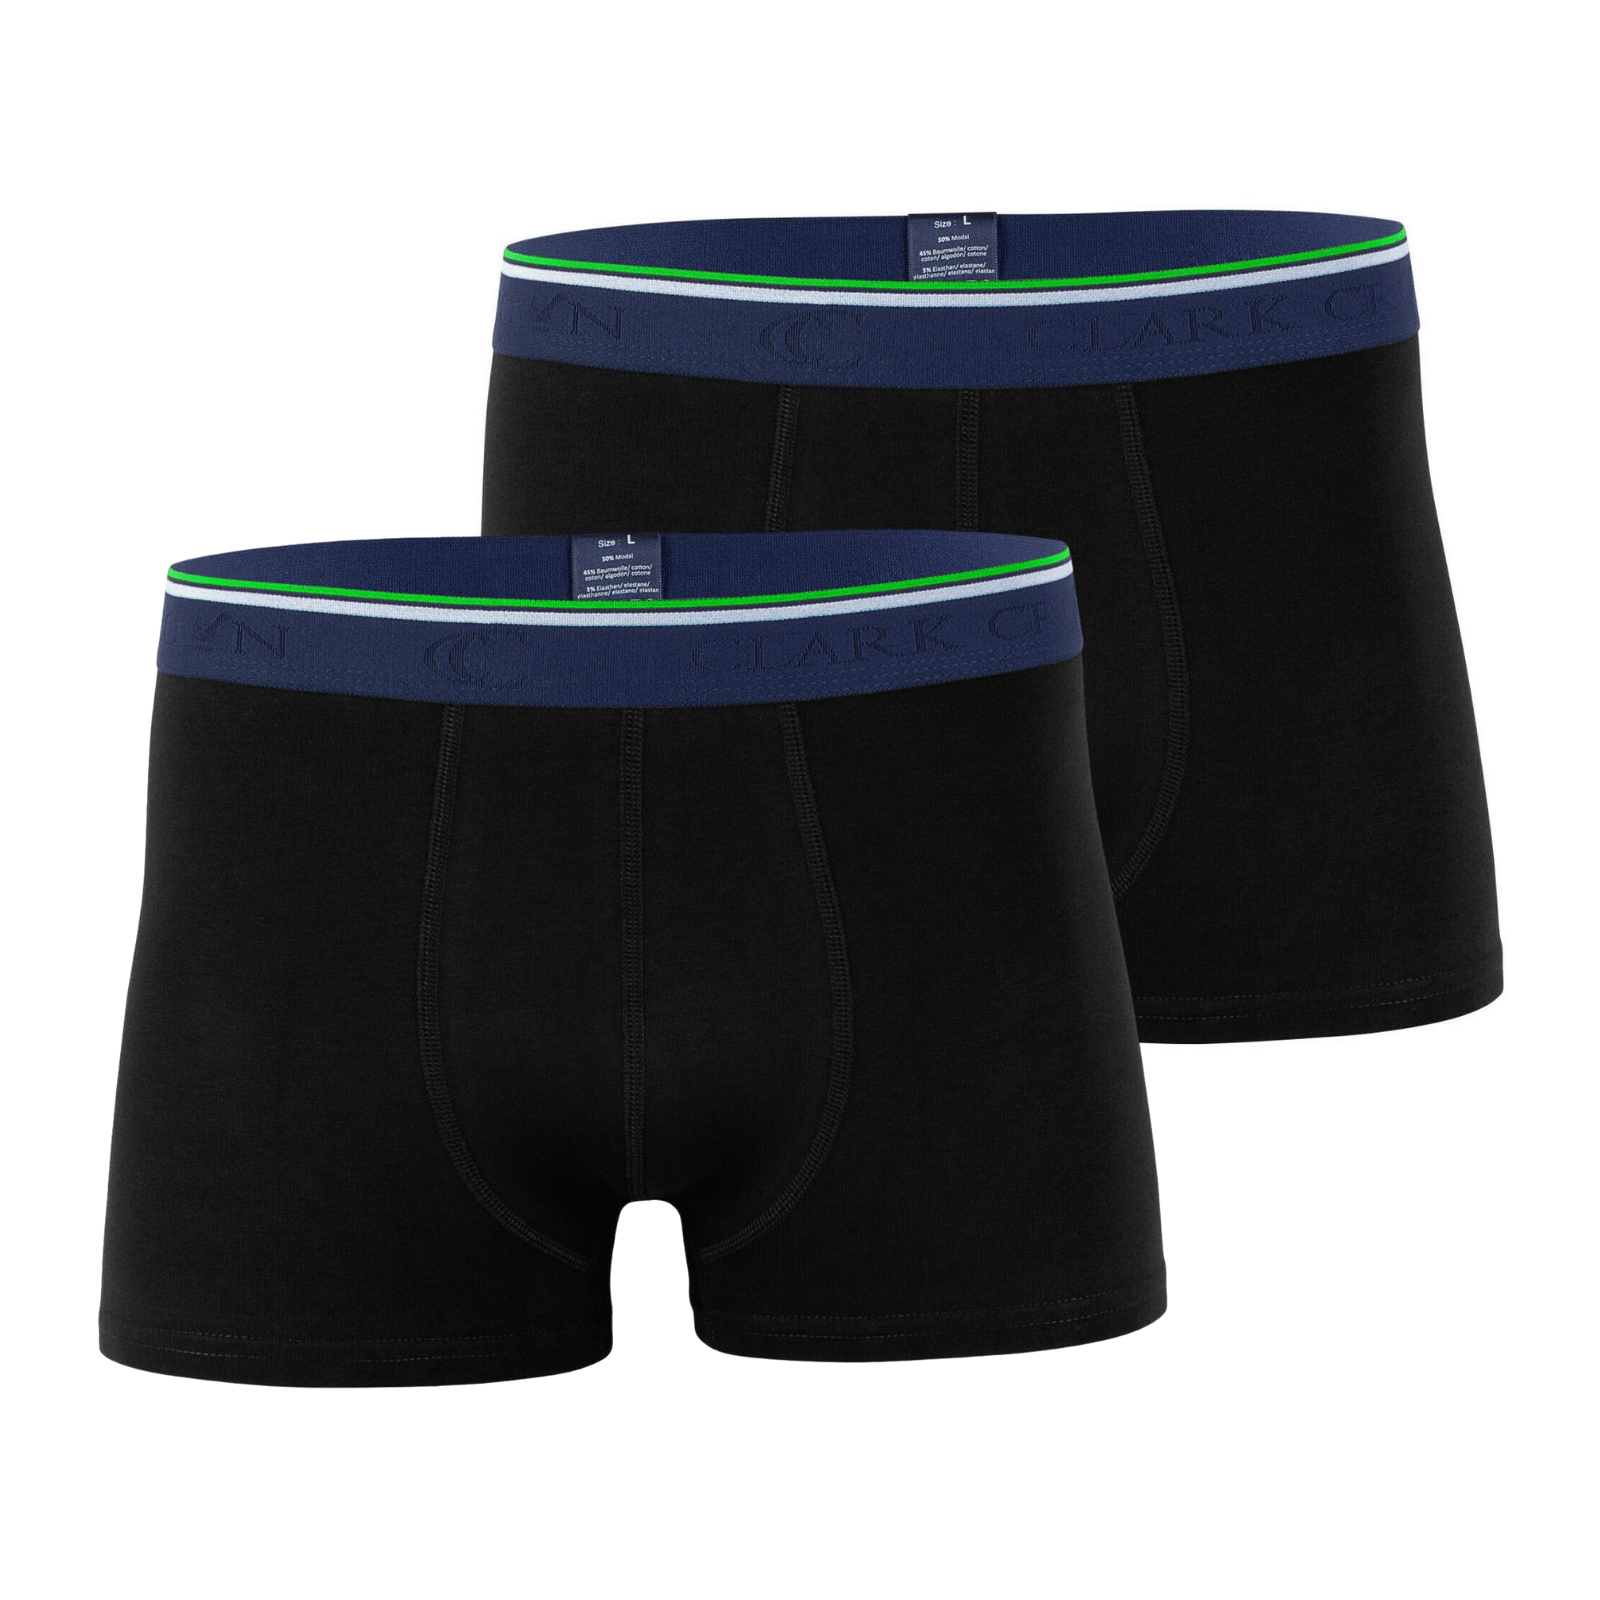 2 Pack Men Bamboo Boxer Shorts with Cotton Fiber Durable Velvety Breathable Soft